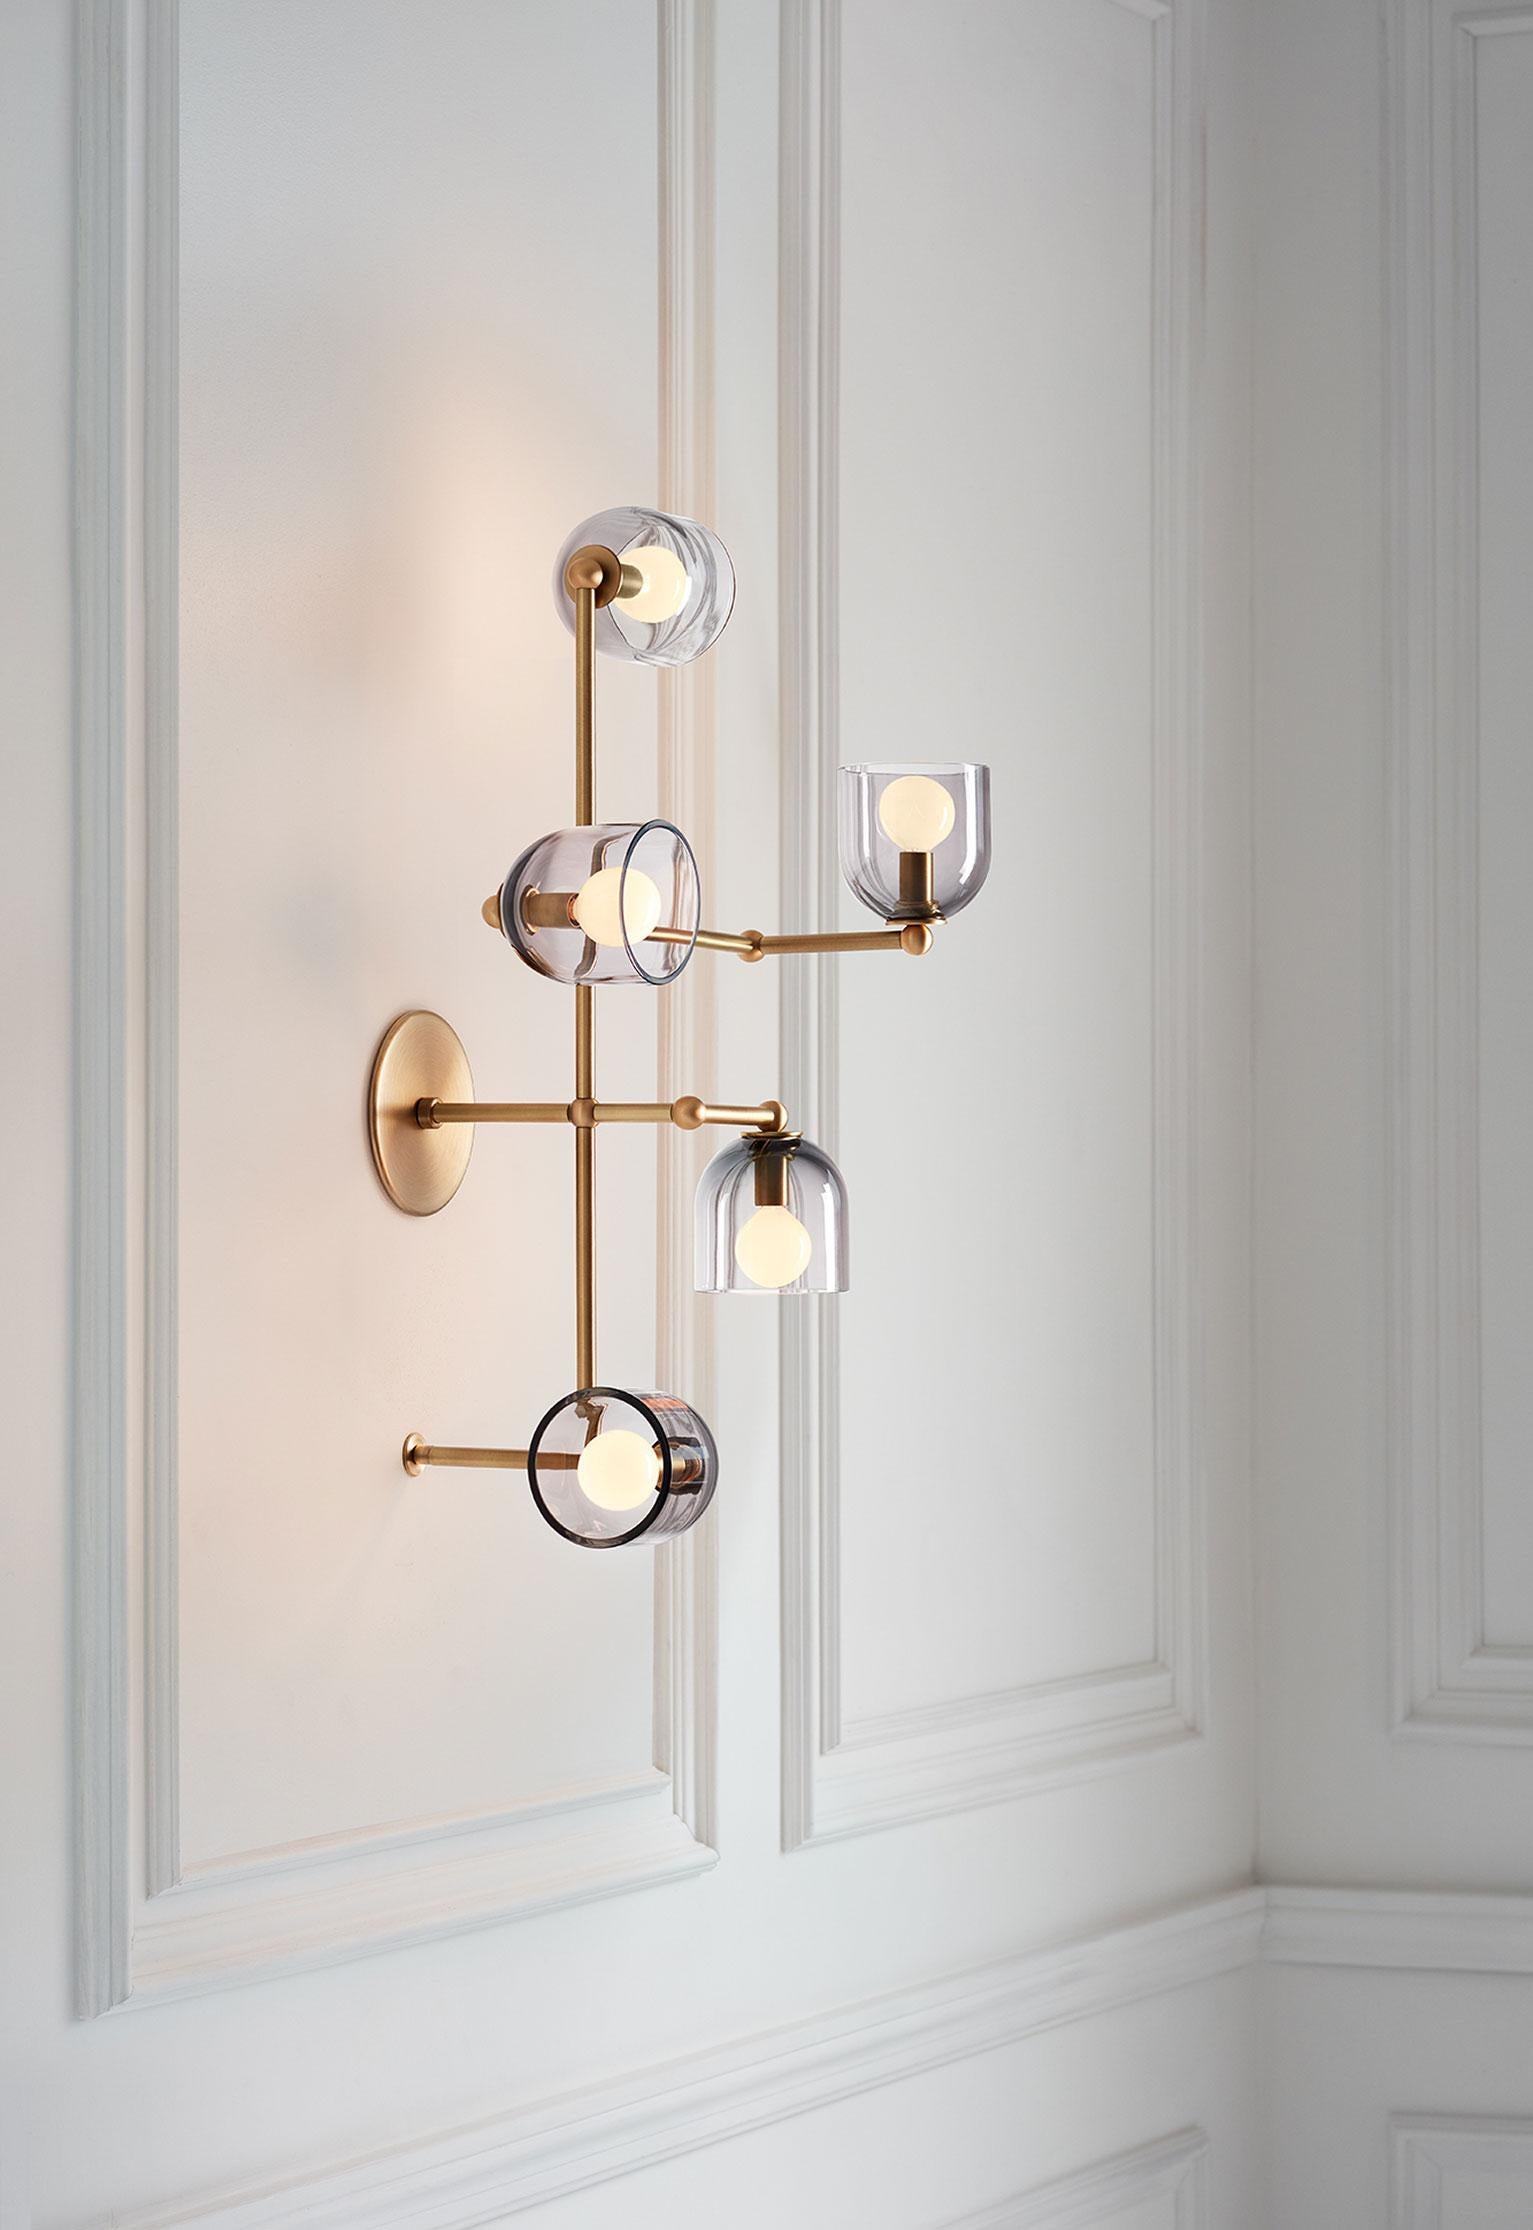 Glass vessels extend gracefully on a brass framework.

Parallel elevates the scale and presence of the wall sconce. It has enough personality to substitute for an art piece while retaining all the functionality of a sconce.

Parallel can be used